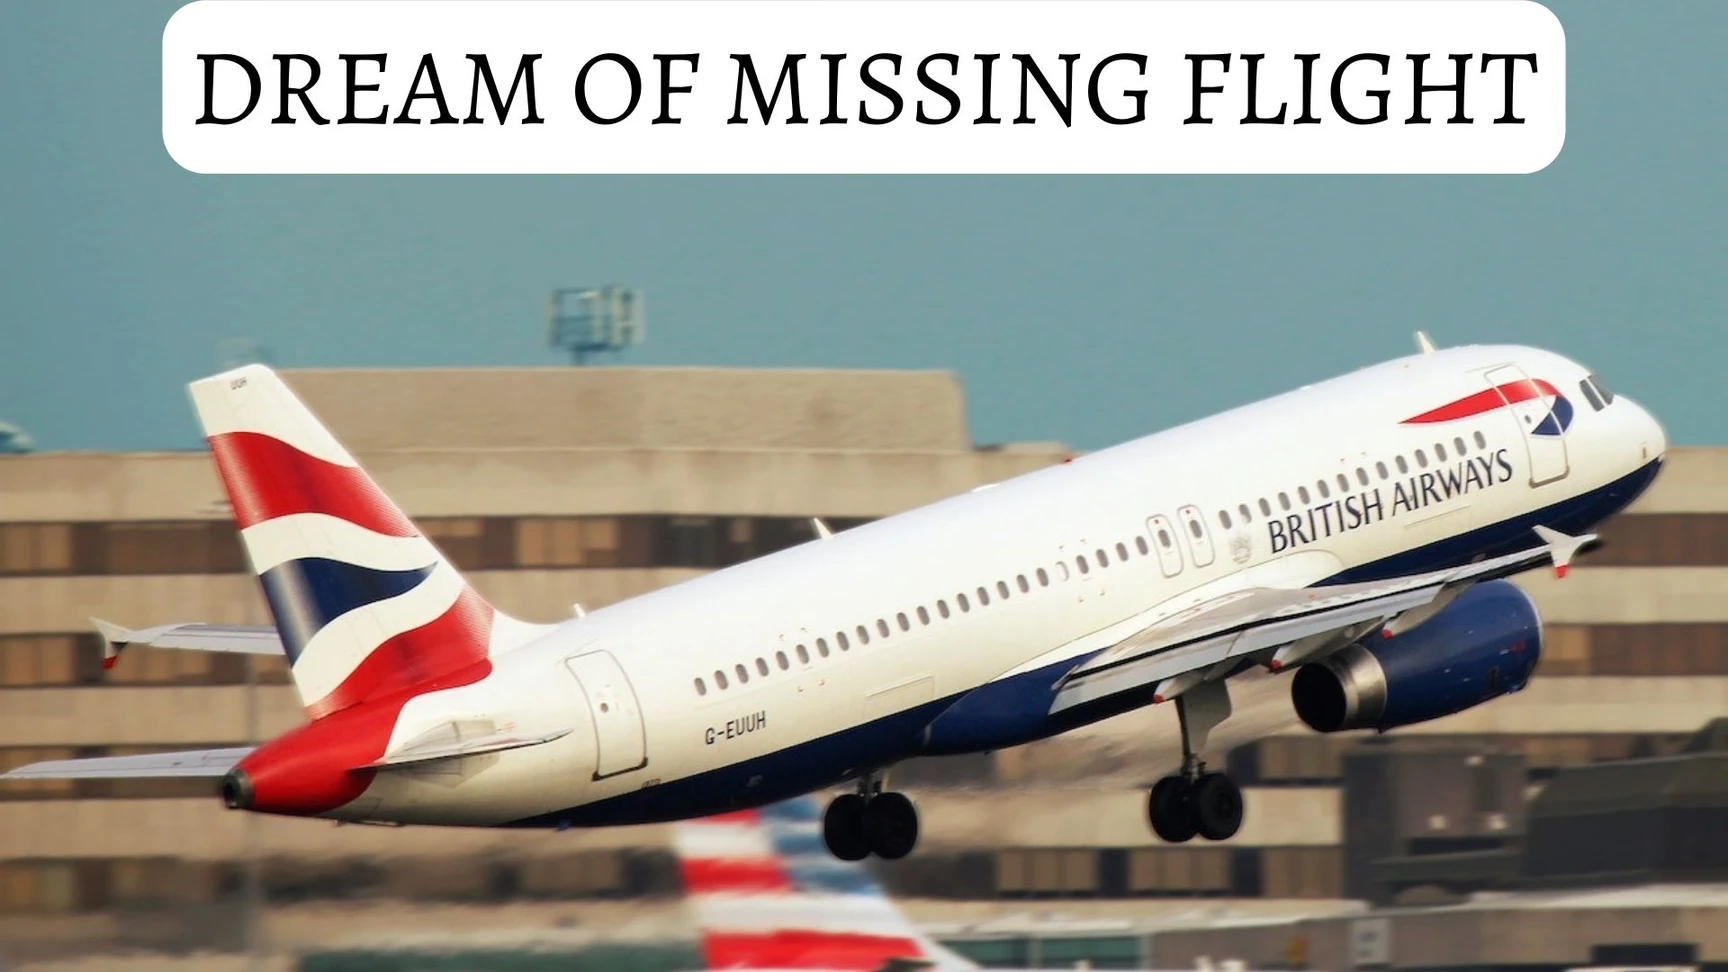 Missing A Flight In A Dream Symbolically